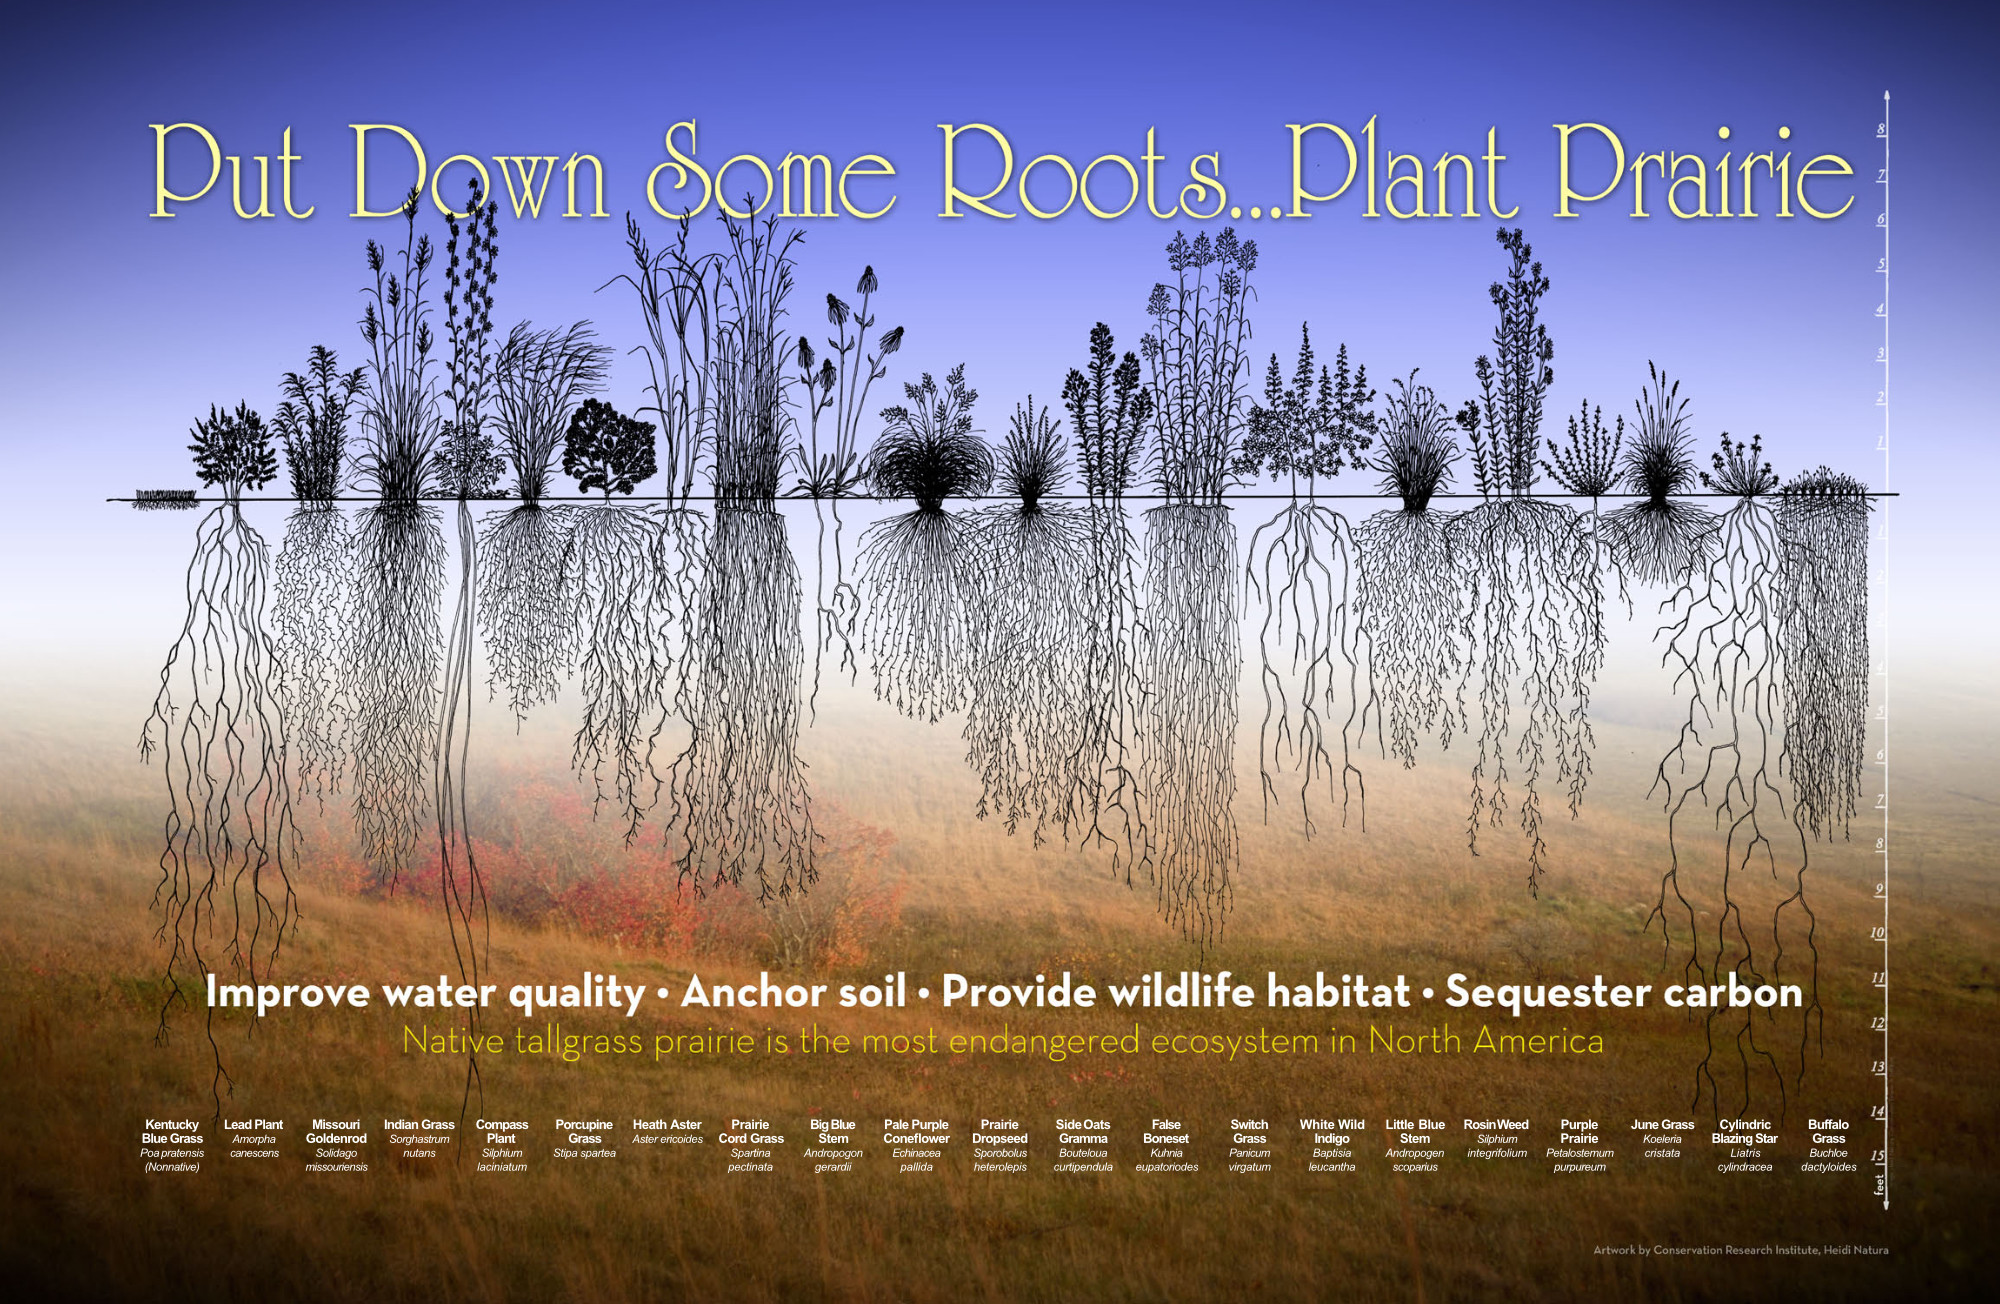 Diagram of tallgrass prairie plants native to North America, showing the depth of their roots.